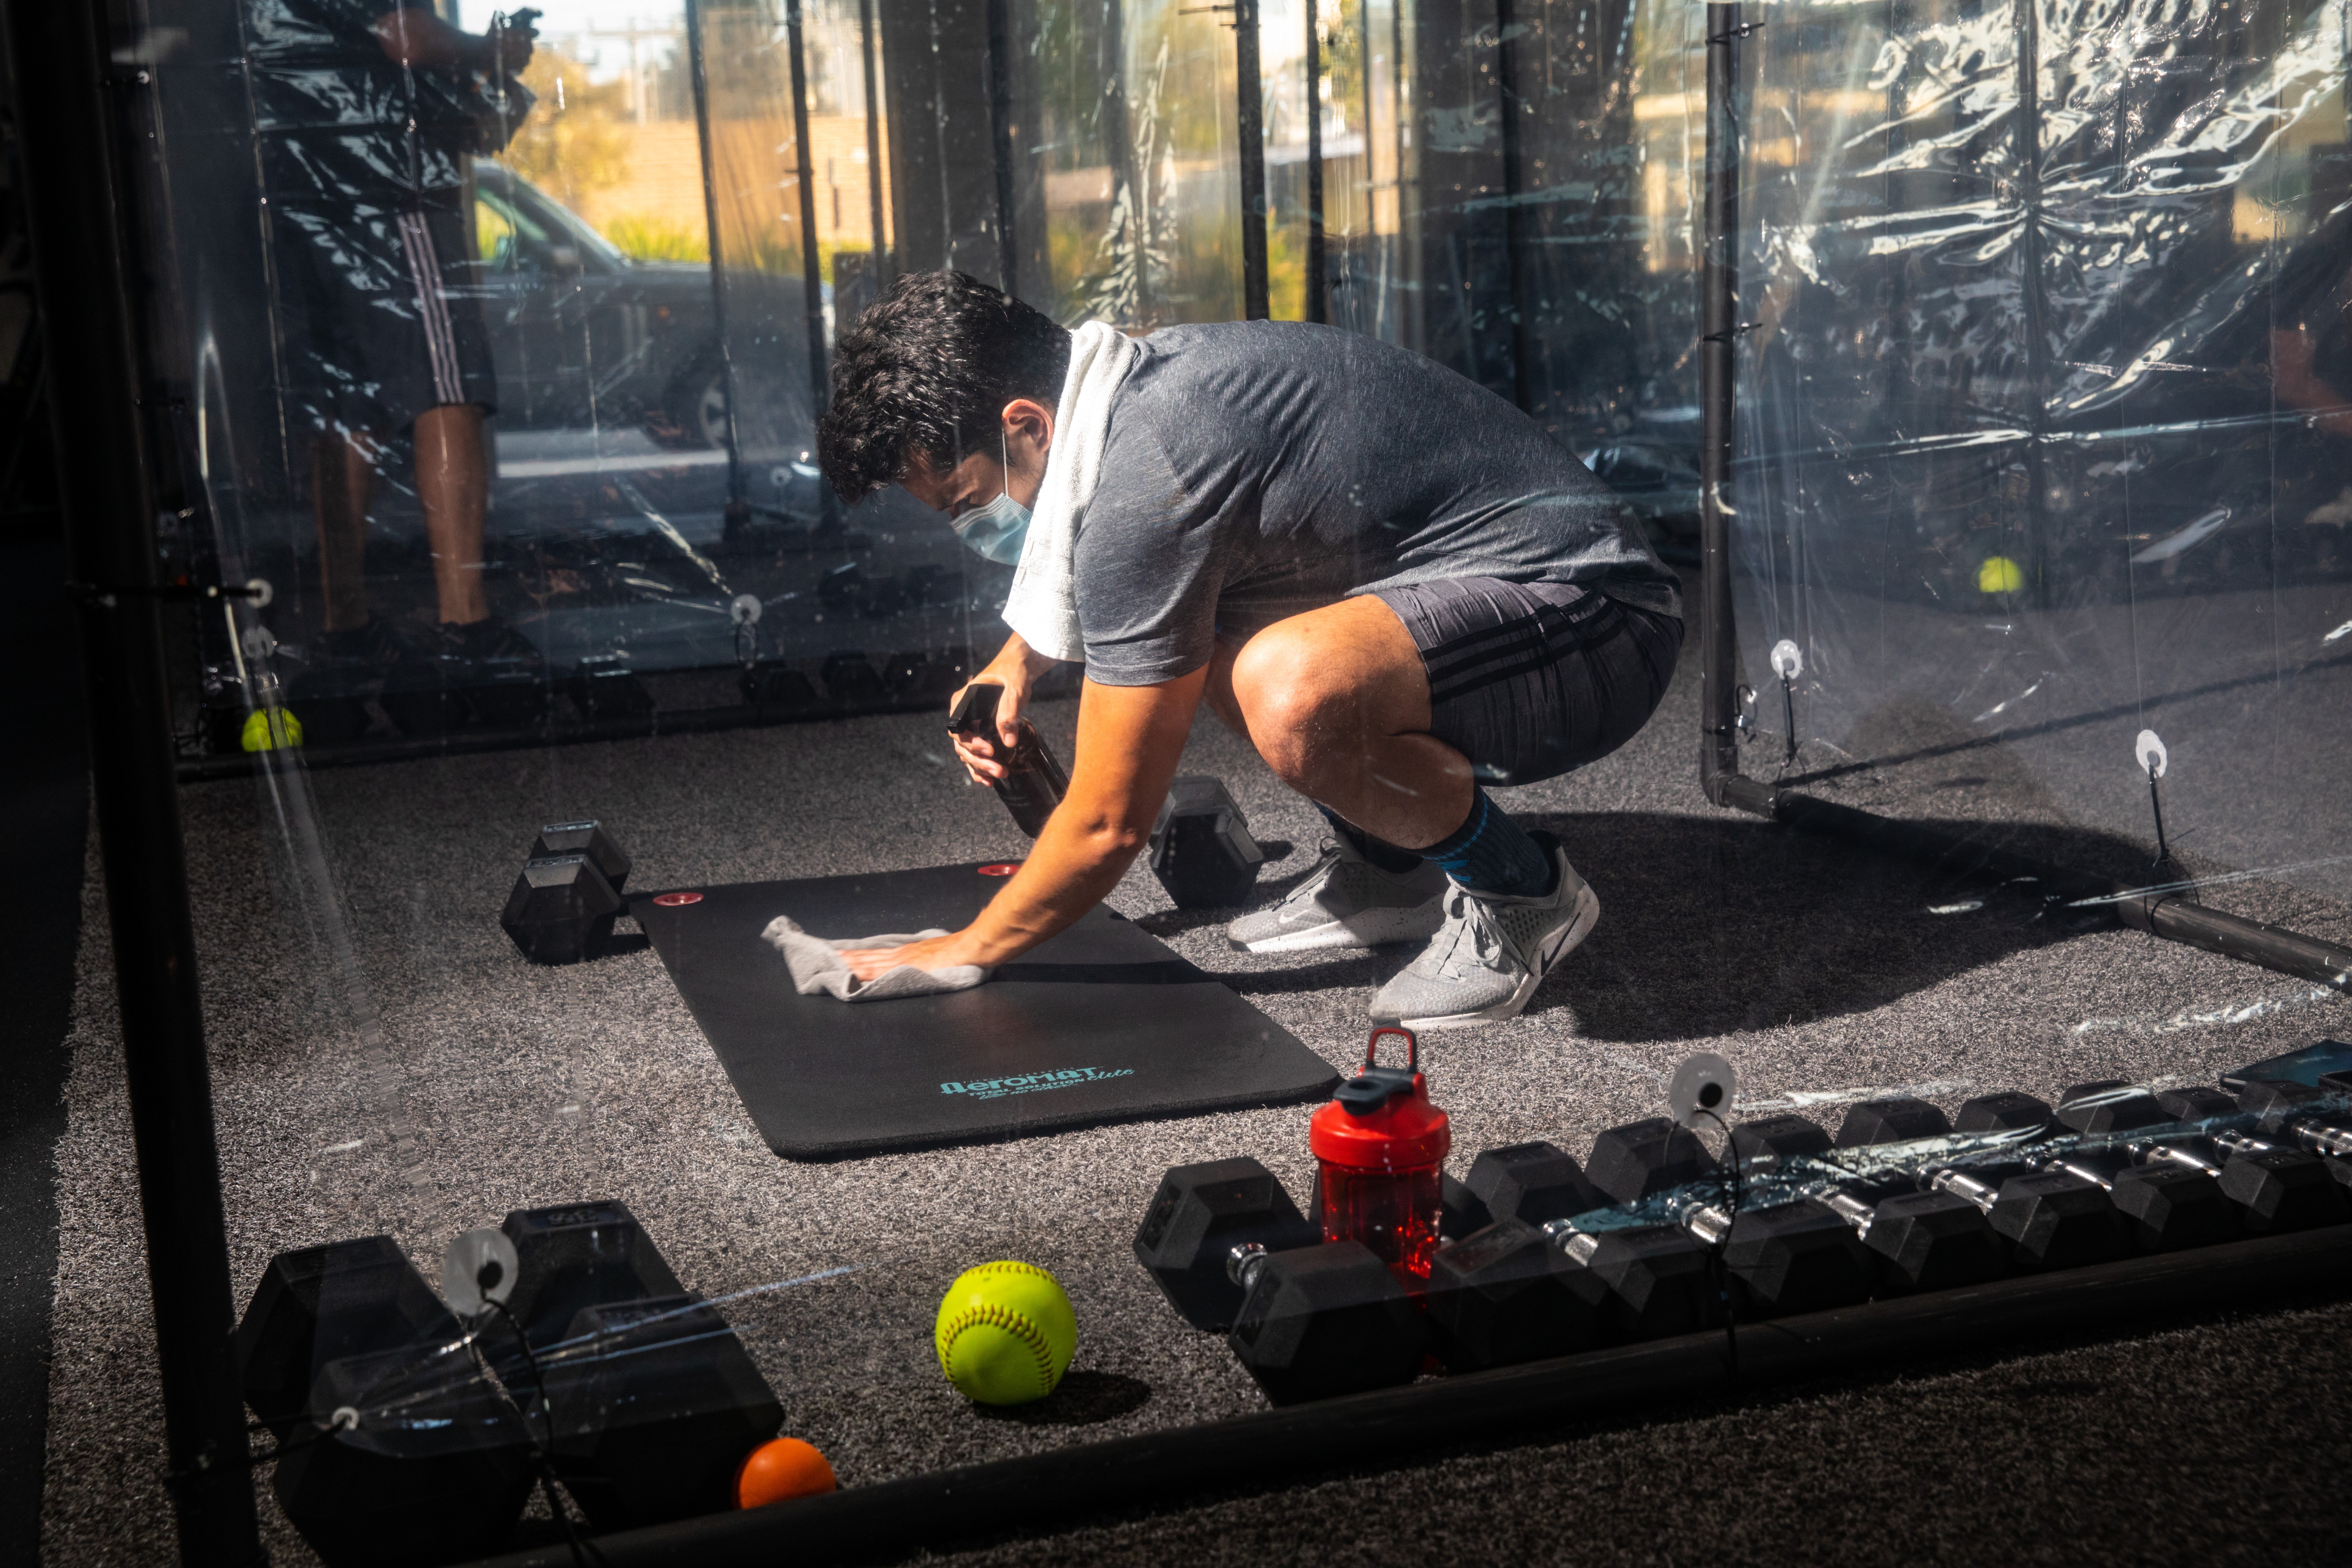 REDONDO BEACH, CA - JUNE 17: Christian Armenta sanitizes his Gainz Pod, after finishing owner and head coach Peet Sapsins HIIT class, which stands for high intensity interval training, at Sapsins Inspire South Bay Fitness, in Redondo Beach, CA, on Wednesd (Foto: Los Angeles Times via Getty Imag)